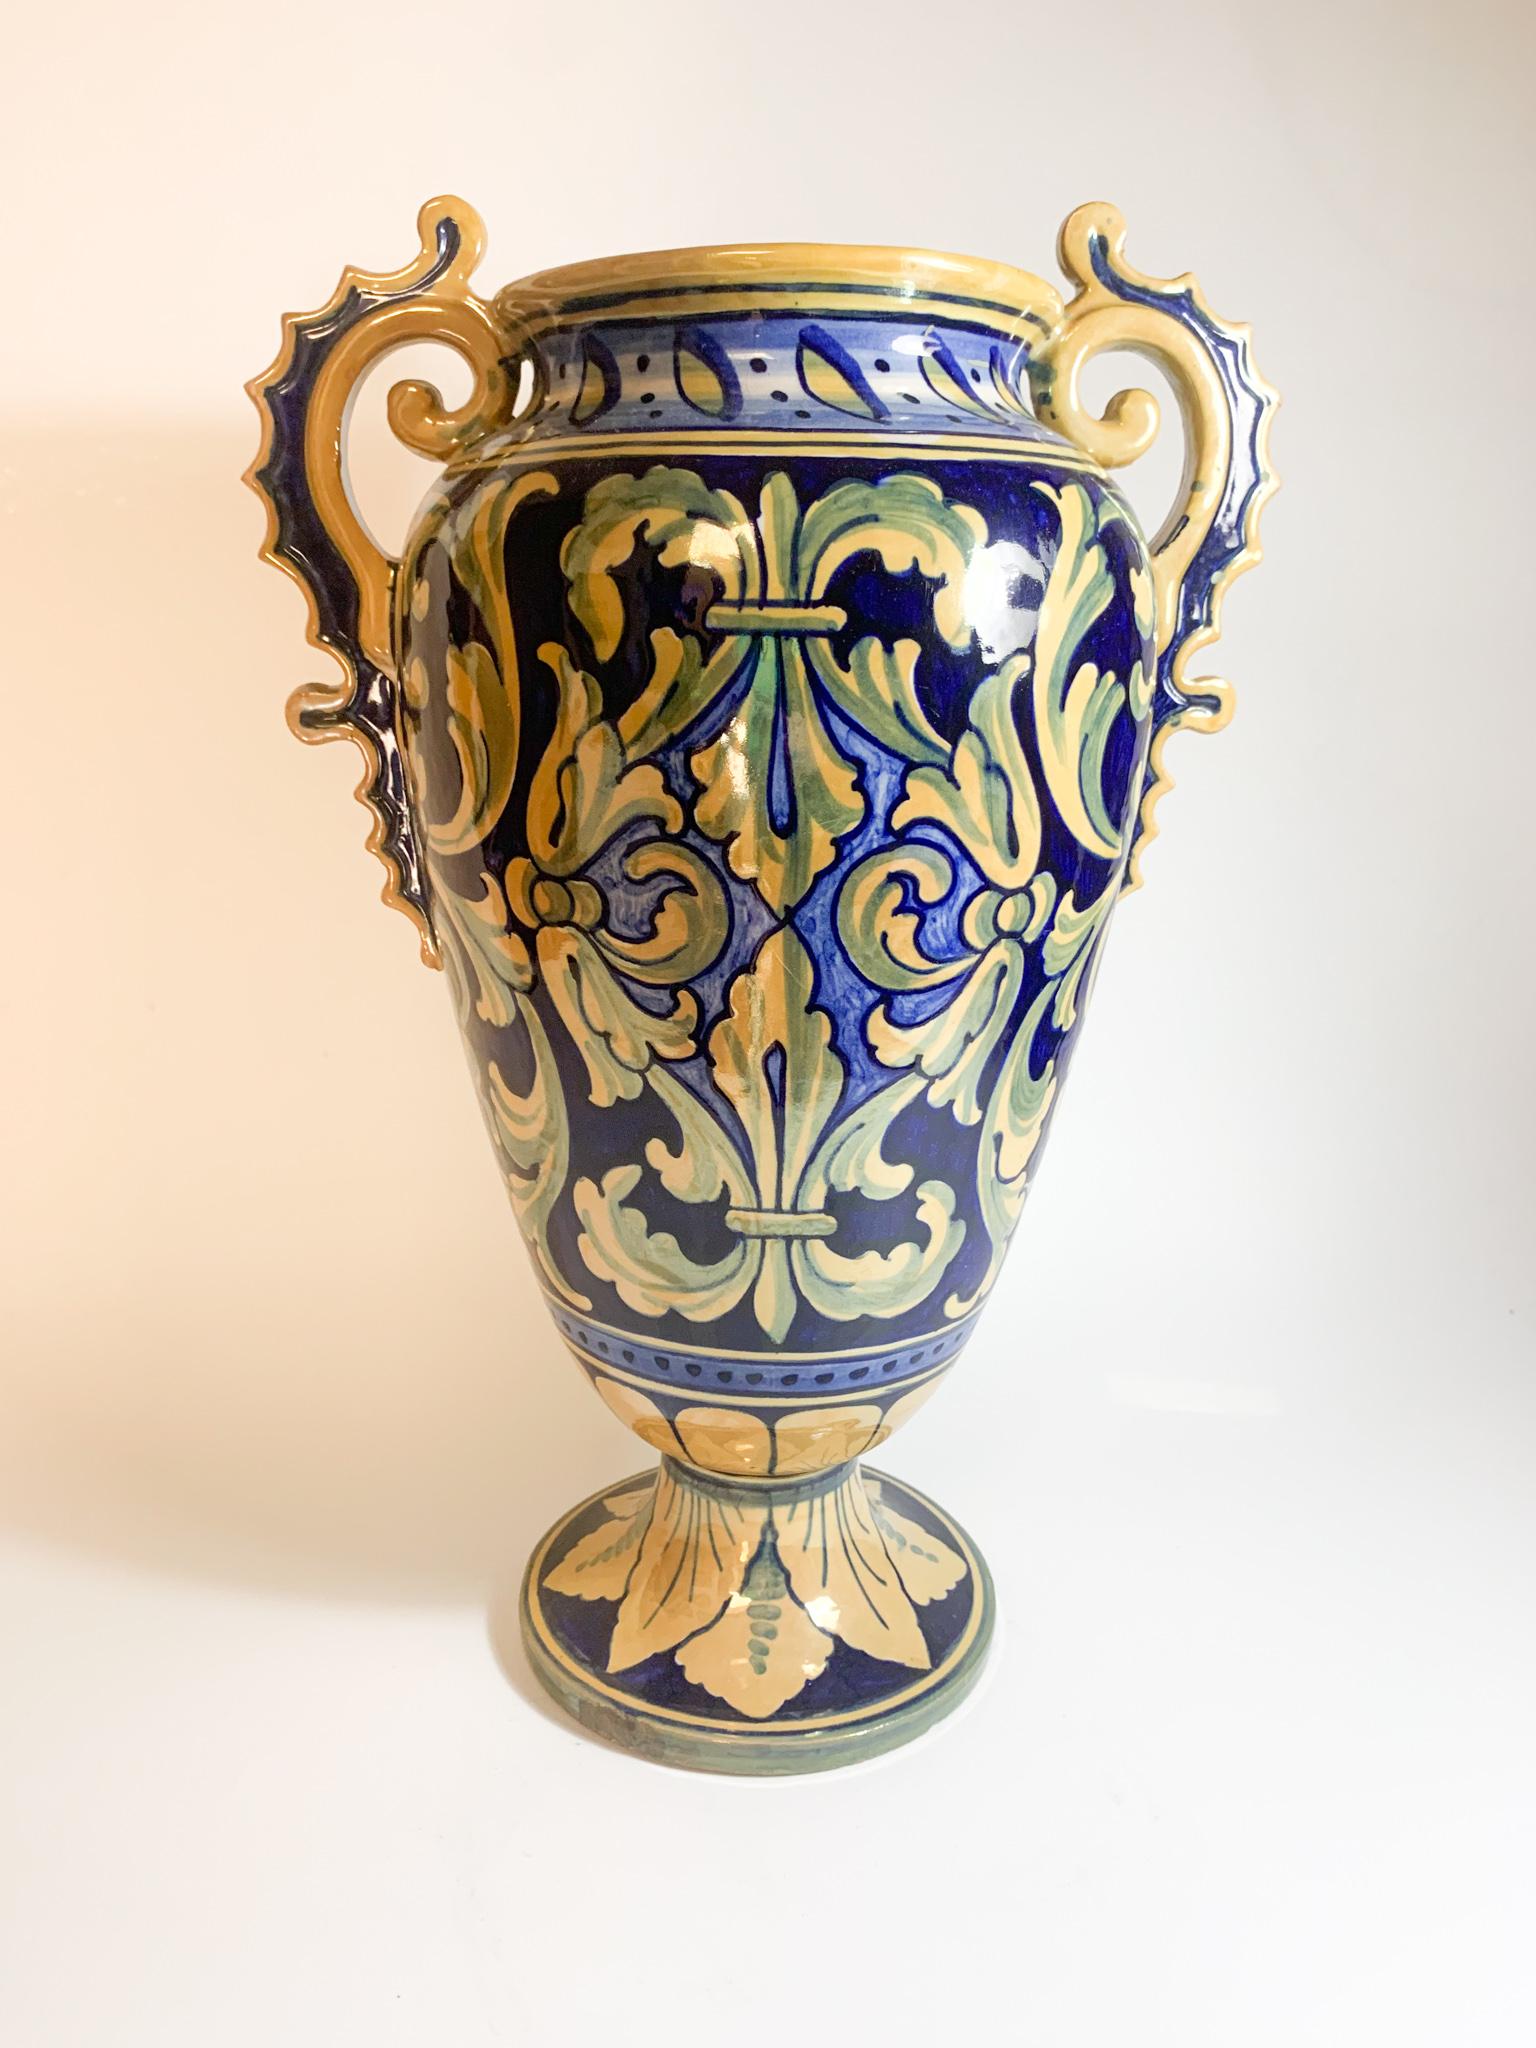 Mid-20th Century Italian Hand Painted Iridescent Ceramic Vase by Gualdo Tadino from the 1950s For Sale